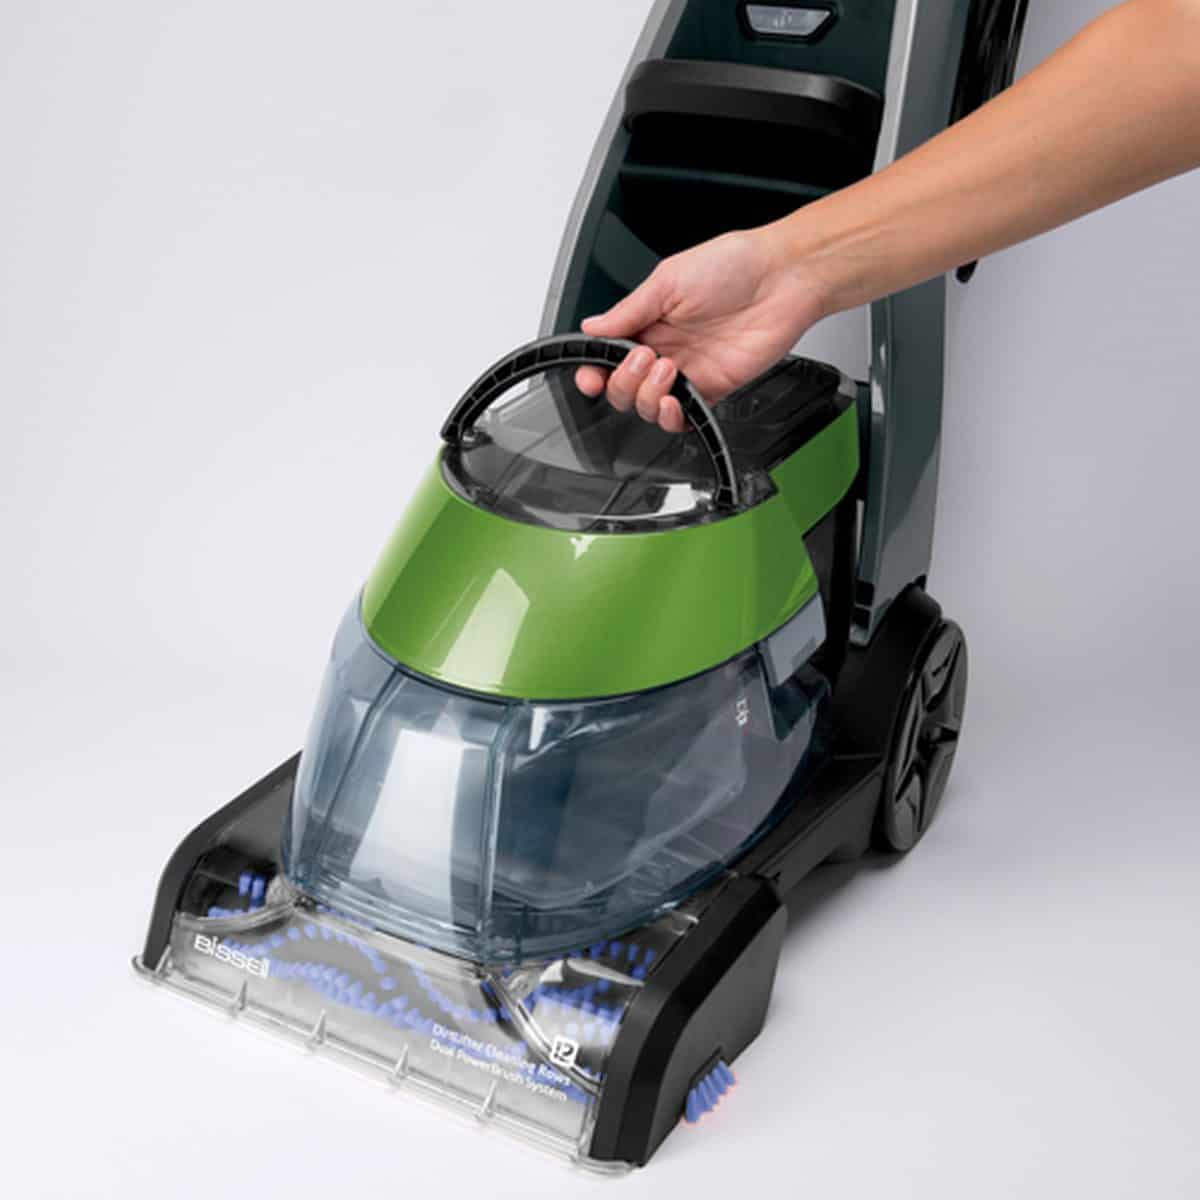 Bissell DeepClean Premier Pet Upright Carpet Cleaner | Top Gadgets To Speed Up Your Spring Cleaning